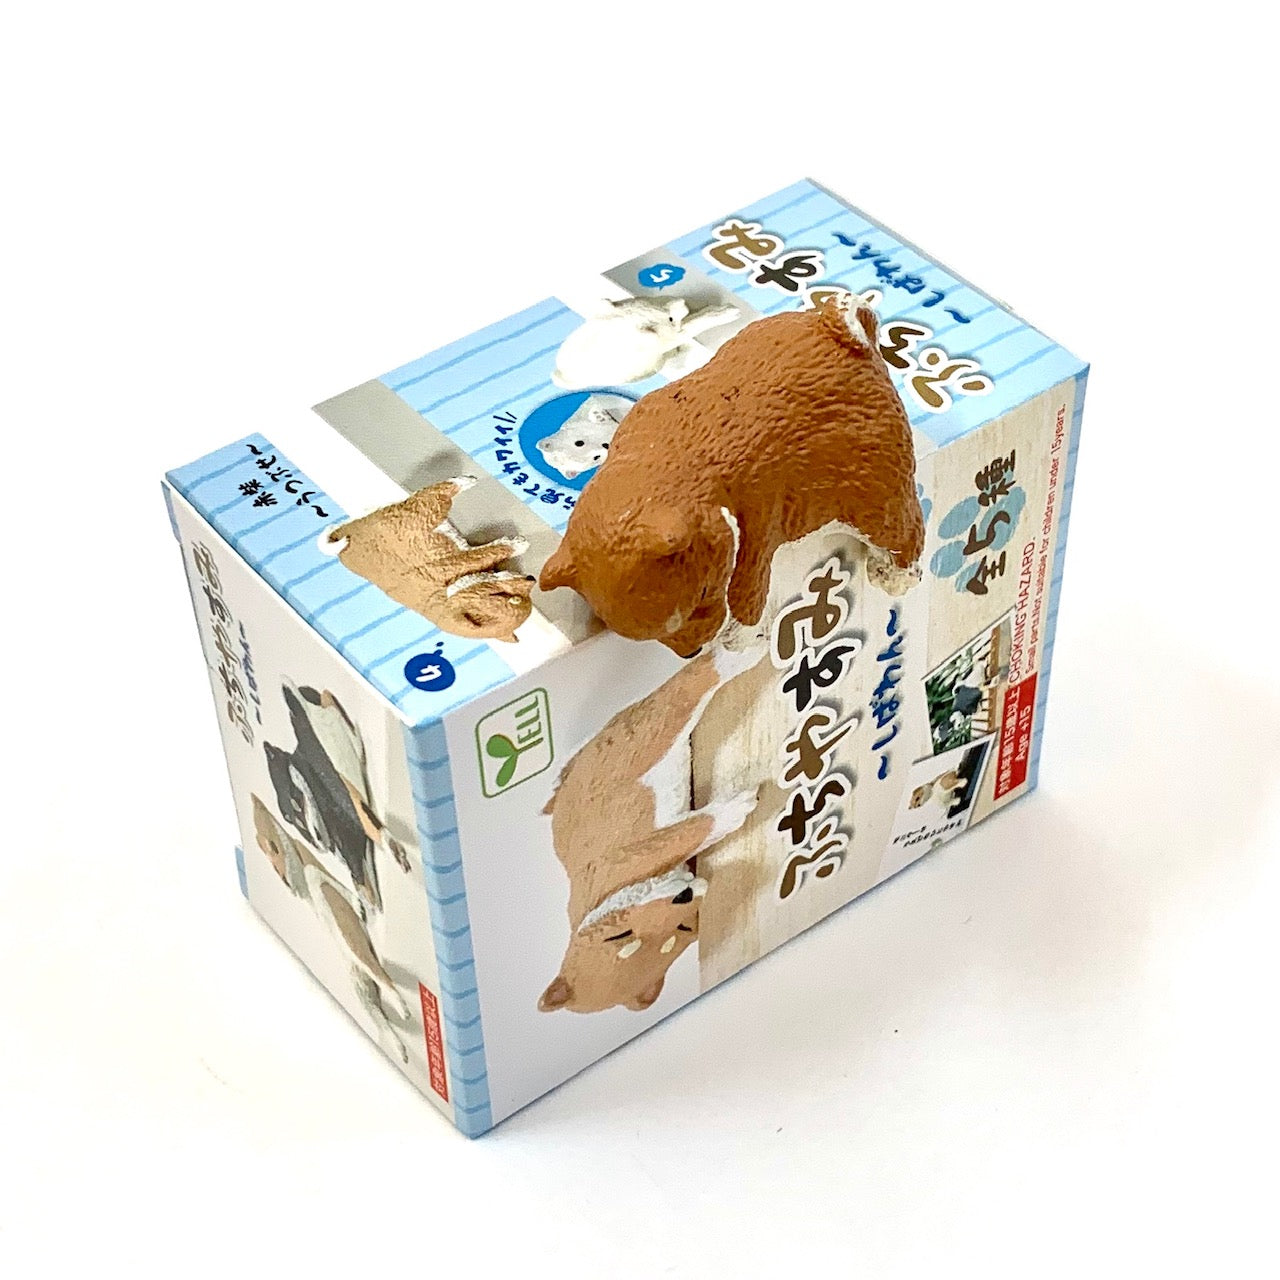 70727 PLAYFUL HANGING DOGS BLIND BOX-10